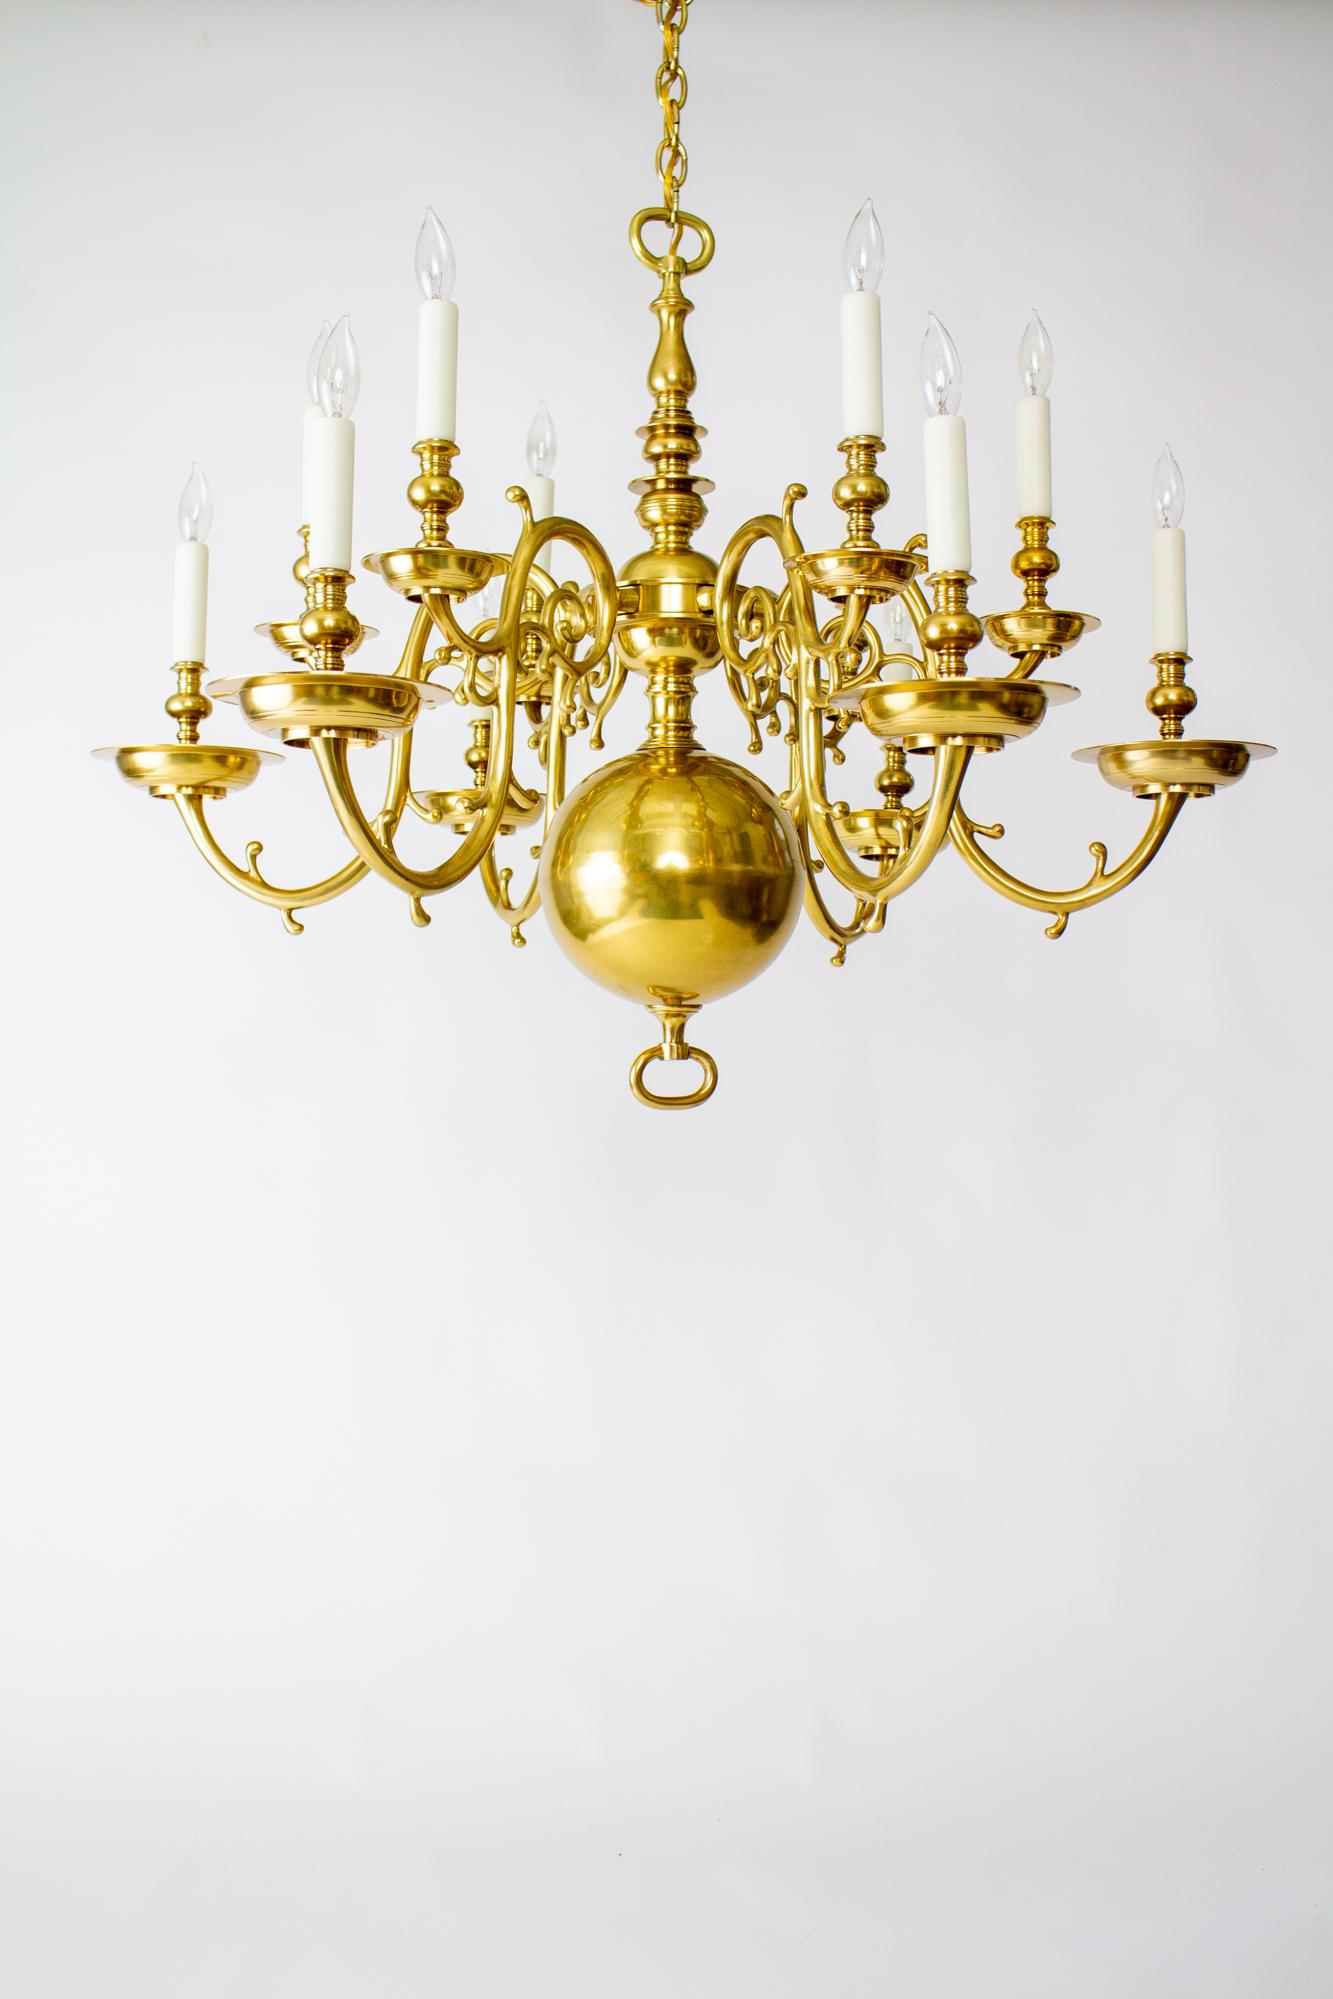 20th Century 12 arm Dutch colonial brass chandelier. Heavy cast brass chandelier, traditional style. Turned brass stem with a large brass bottom ball. Cast brass arms with turned brass candle cups. Two tiers, Six arms in the top tier and six on the